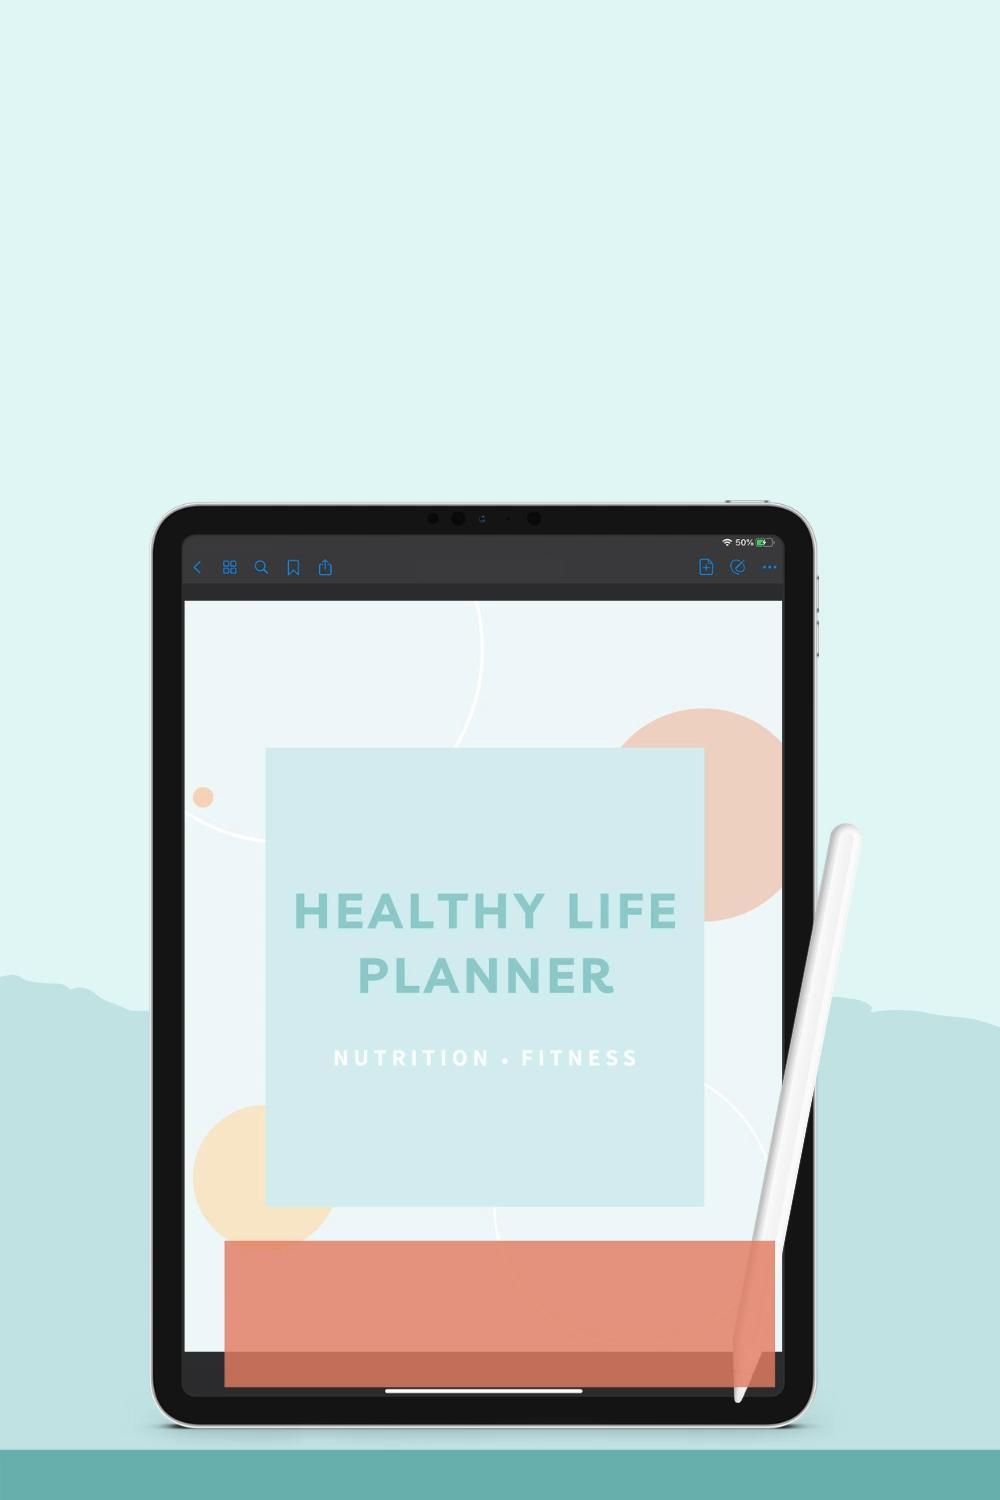 Digital Fitness and Nutrition Planner for Goodnotes, iPads, and Tablets. With Hyperlinked Tabs! - Digital Fitness and Nutrition Planner for Goodnotes, iPads, and Tablets. With Hyperlinked Tabs! -   18 setting fitness Goals ideas